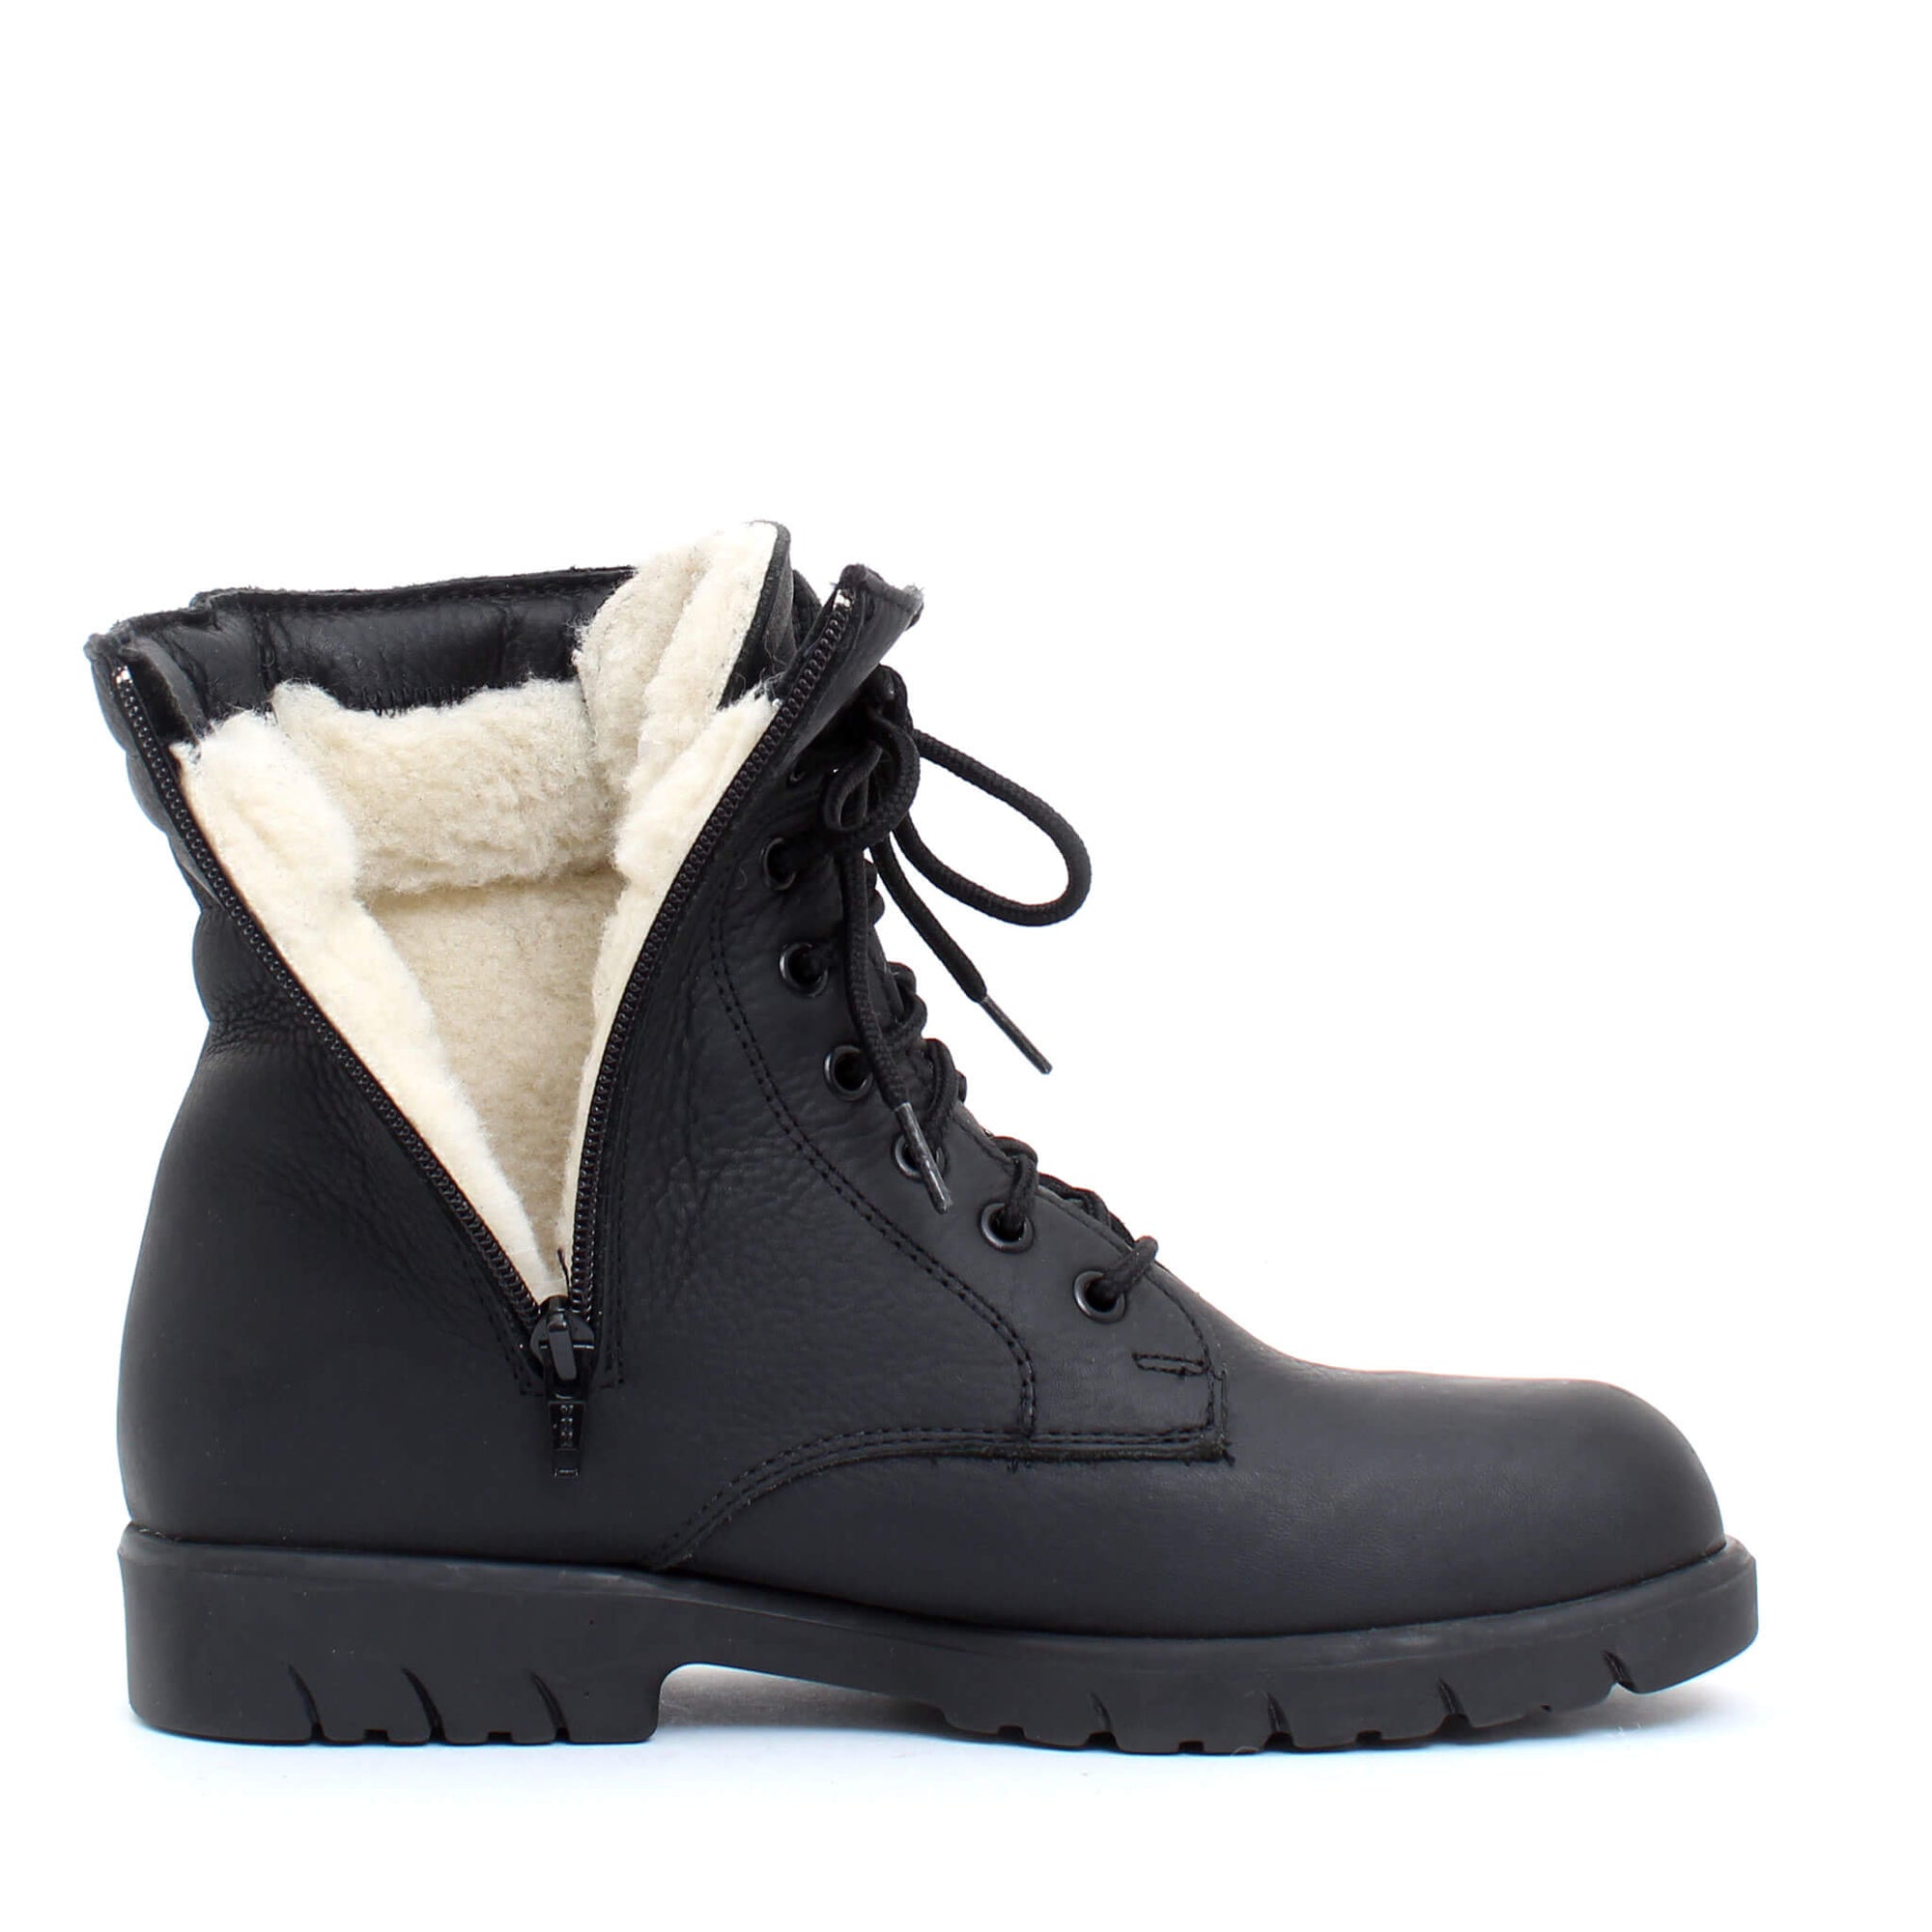 New Paolo winter boot for men - Black 